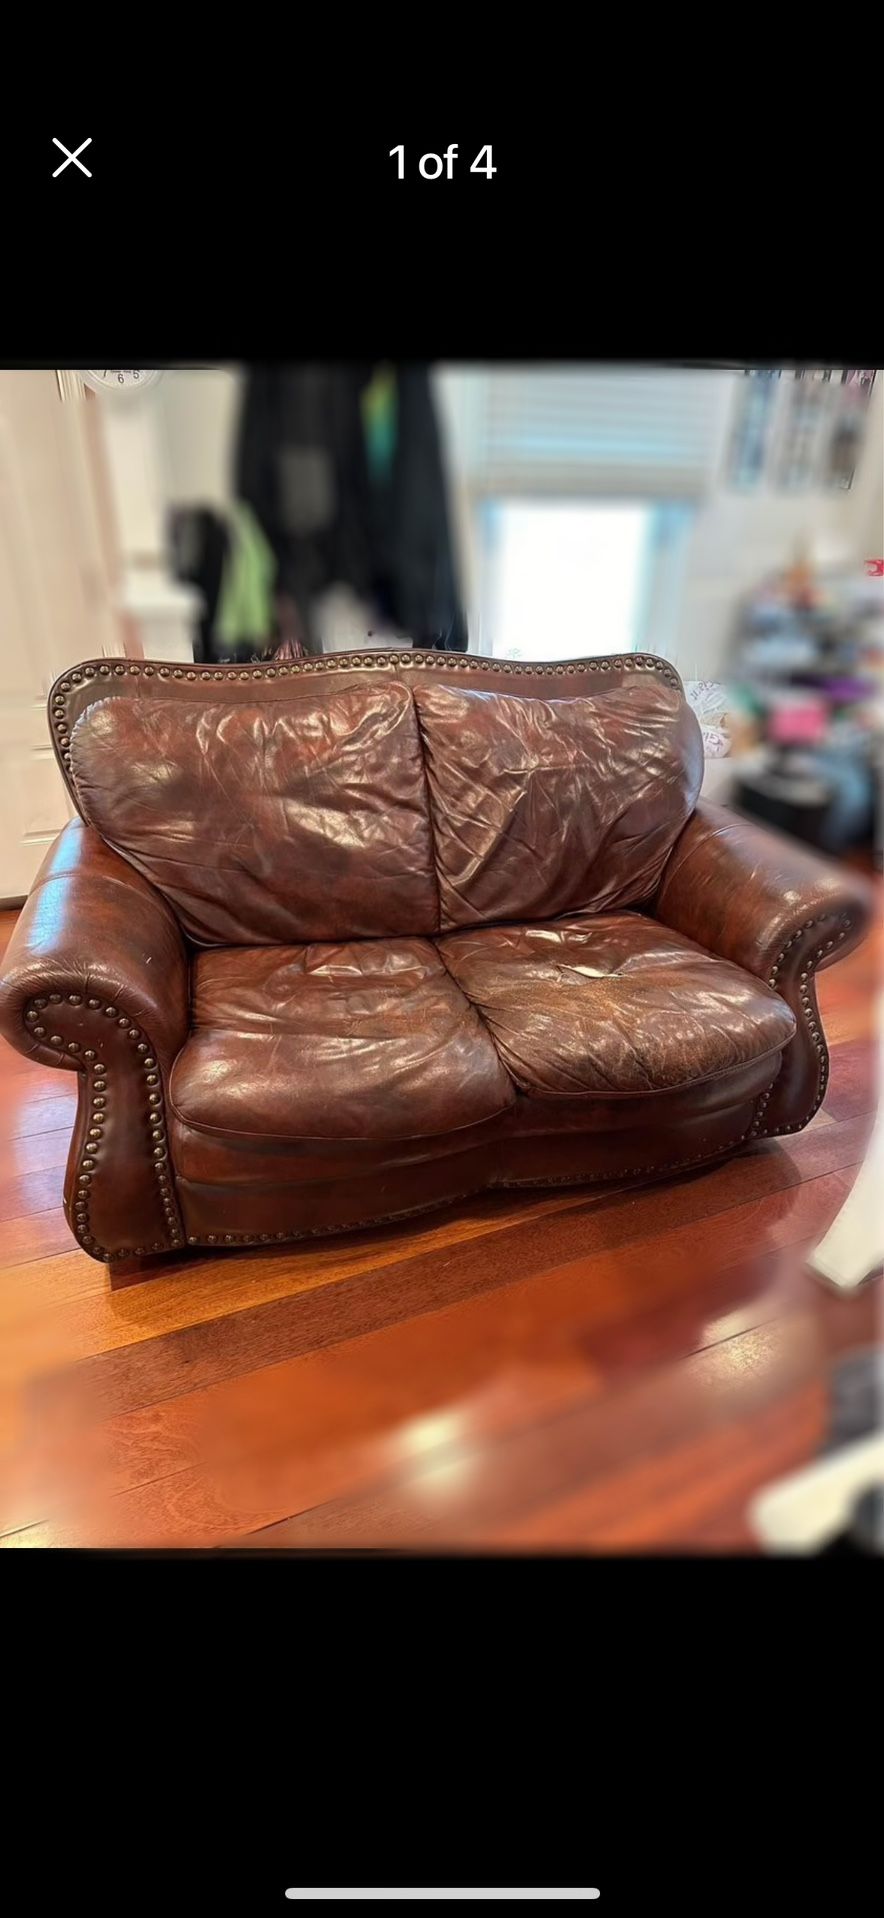 Used leather Loveseat Couch